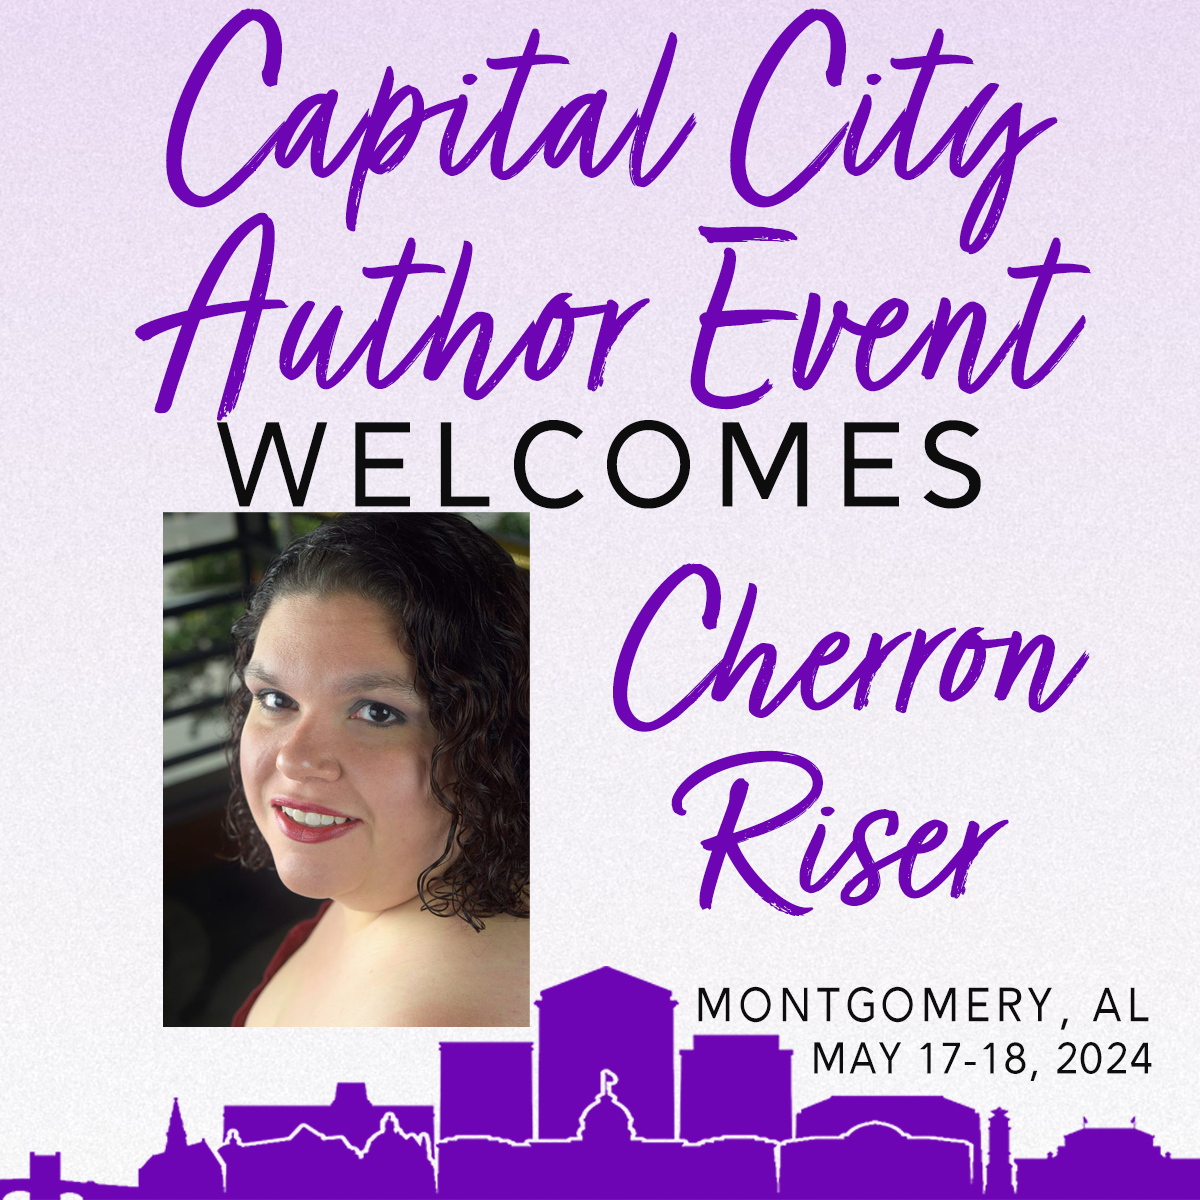 This is going to be another awesome event! Make sure you get your ticket and come see me Ticket Link: CCAE2024.eventbrite.com #CCAE #authorsigning #authorevent #writingcommunity